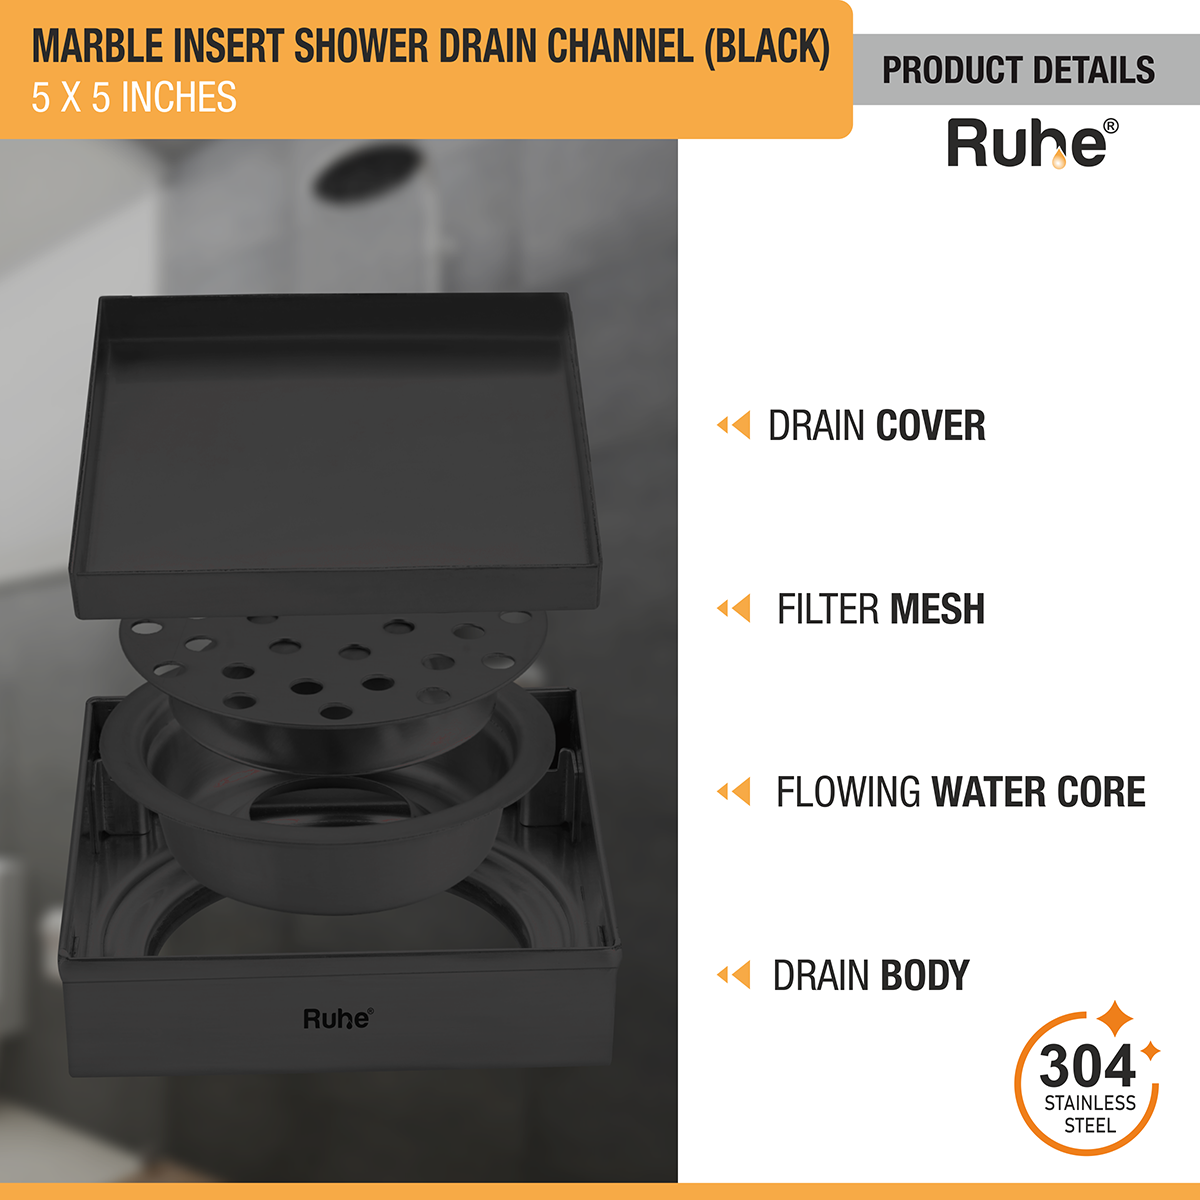 Marble Insert Shower Drain Channel (5 x 5 Inches) Black PVD Coated with drain cover, filter mesh, flowing water core, drain body